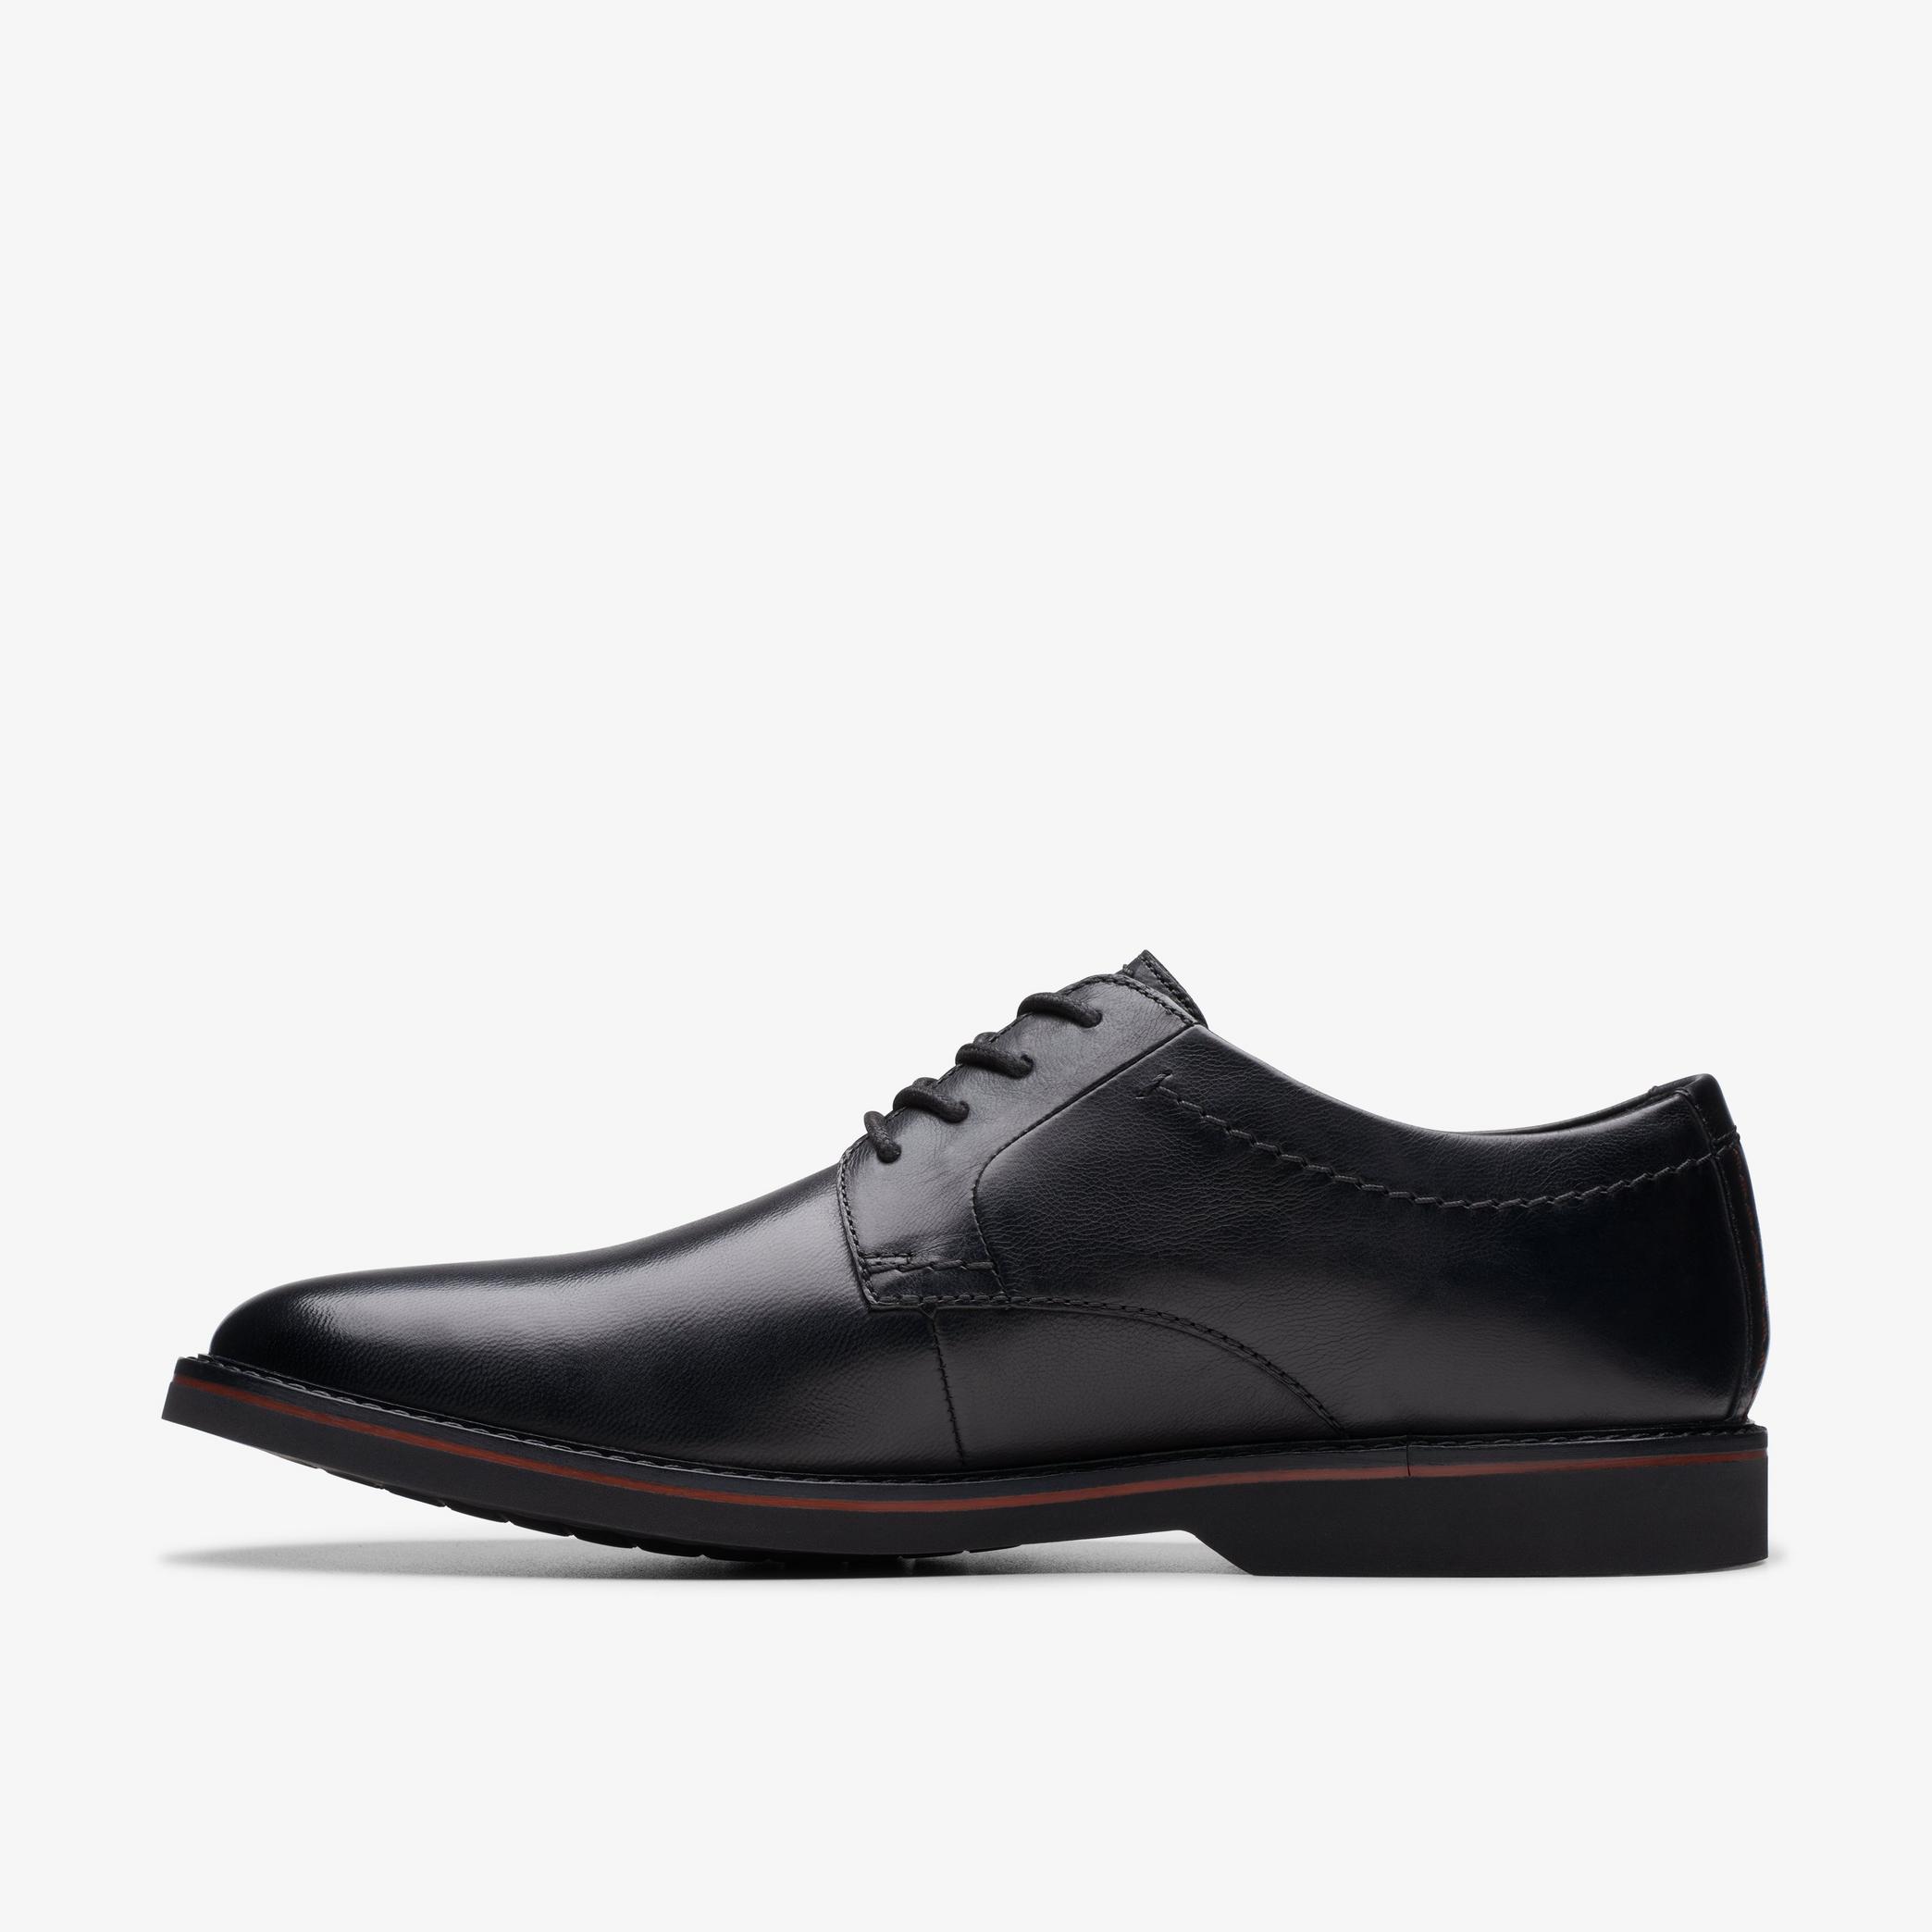 Atticus Lace Black Oxford Shoes, view 3 of 7